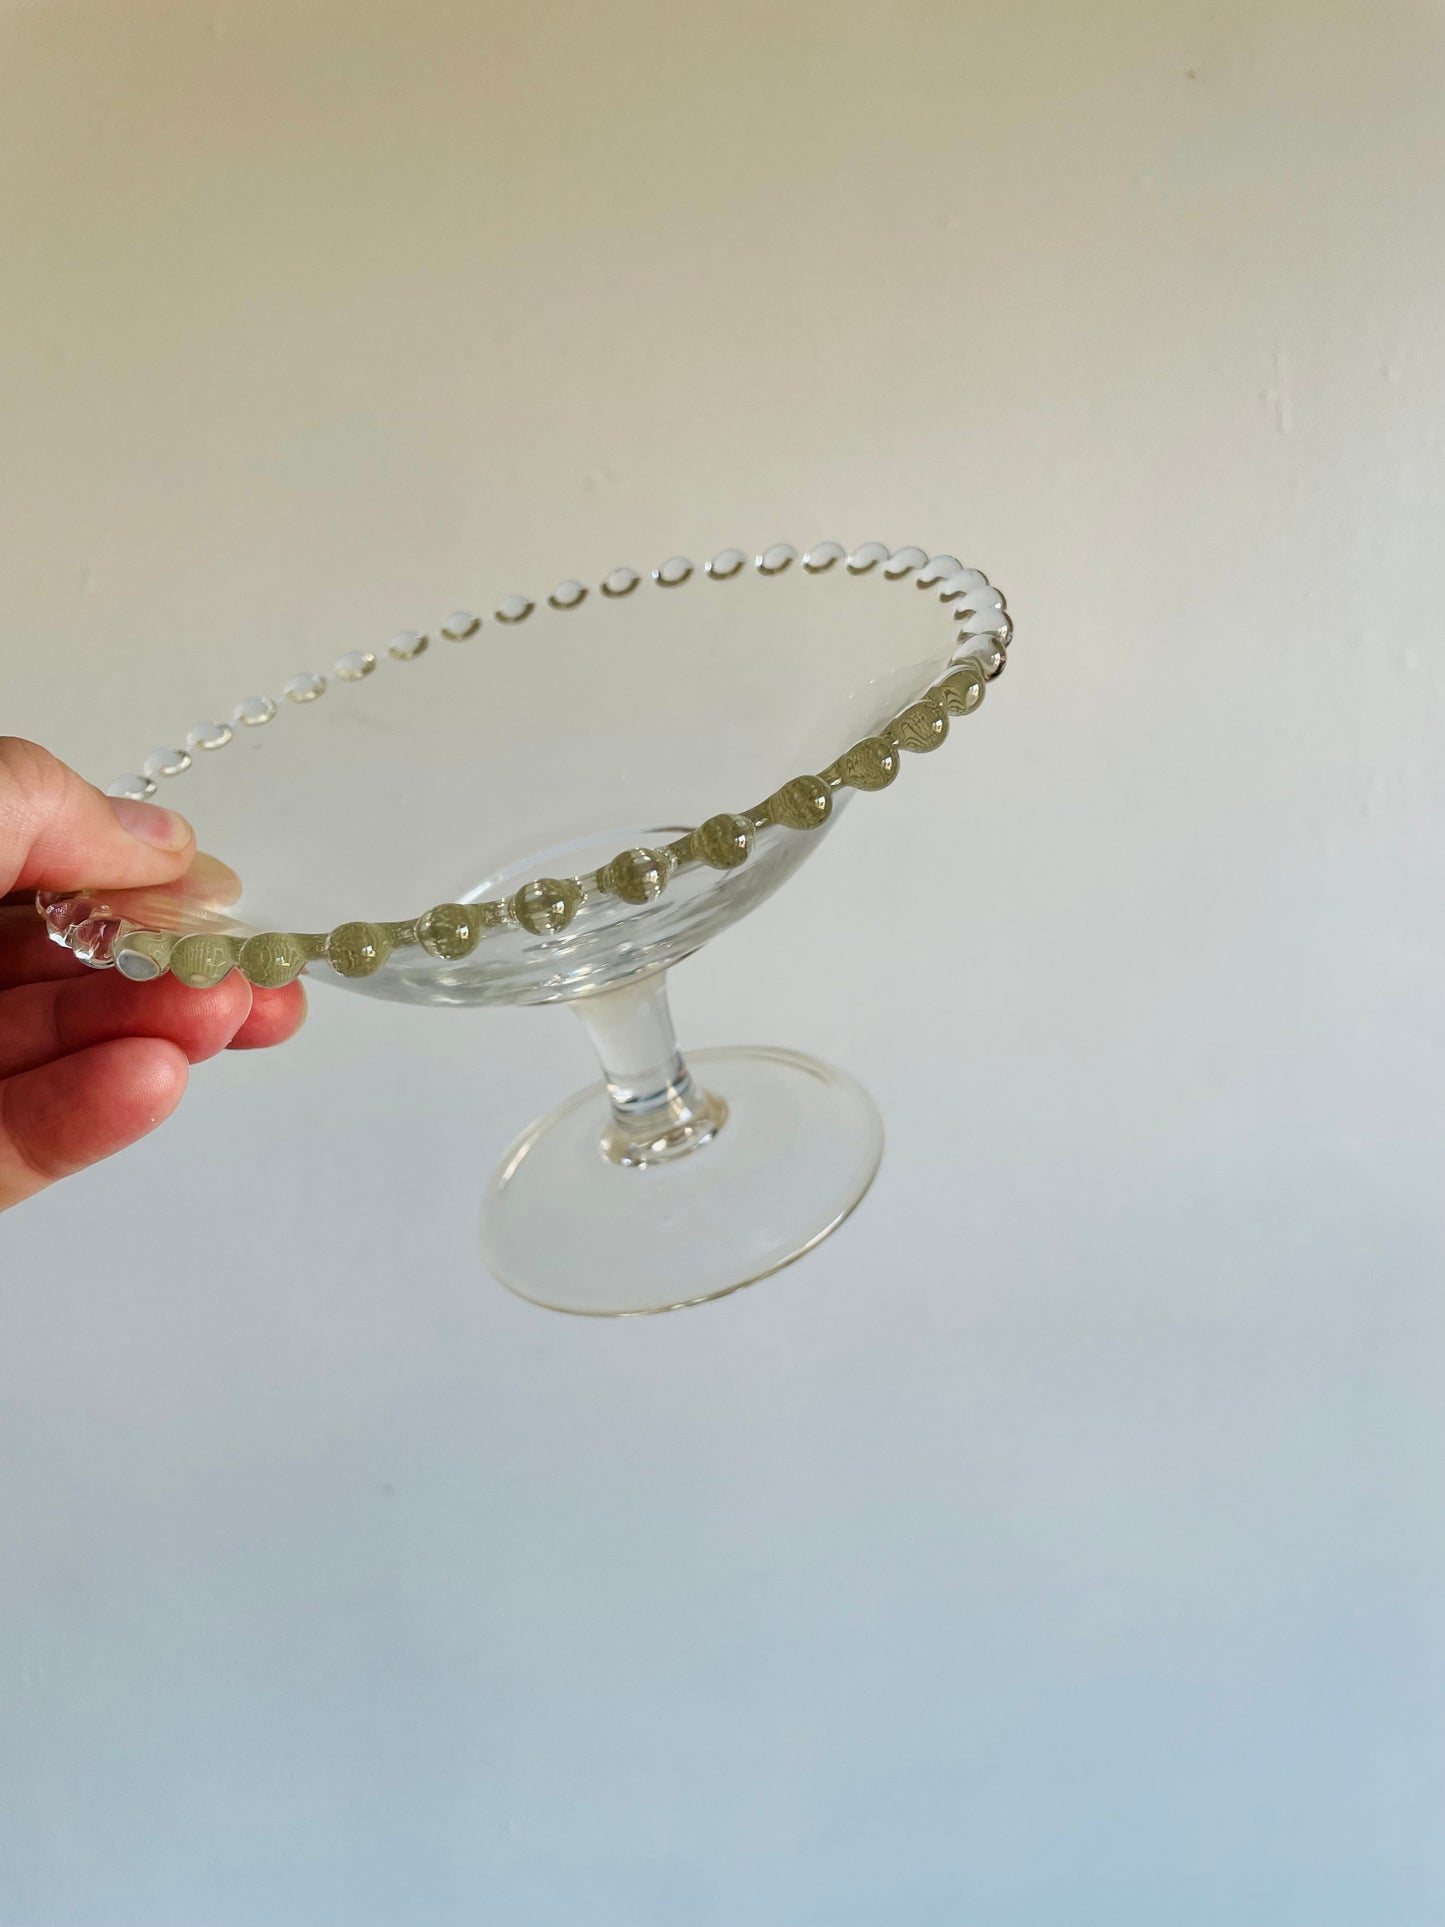 Instant Candlewick Depression Glass Collection! - Set of 3 Bowls in Different Shapes